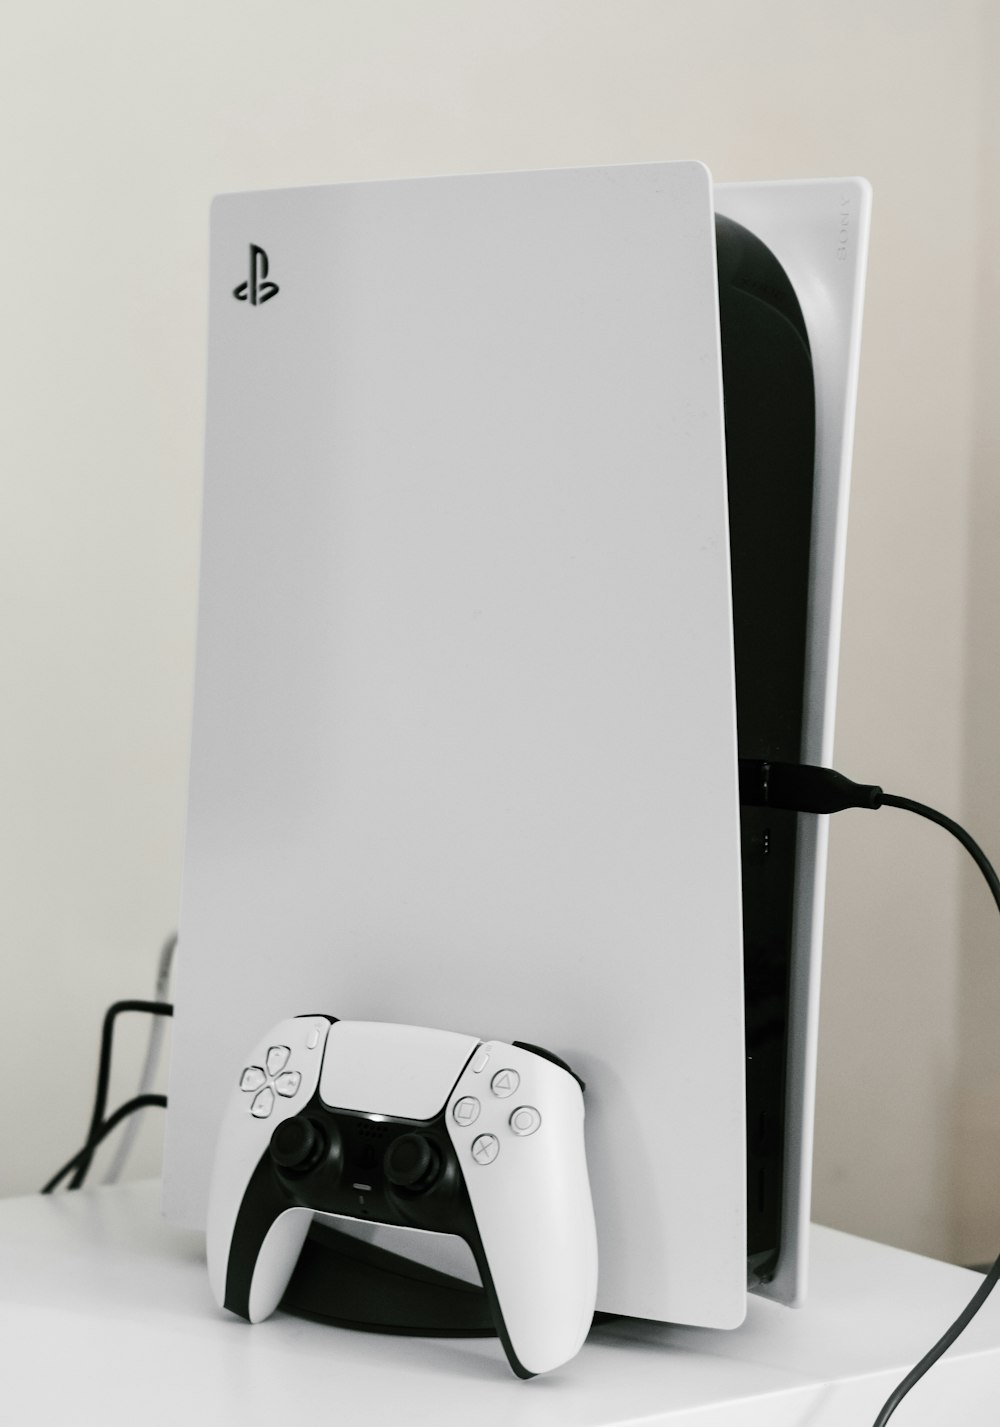 Playstation 5 Pictures | Download Free Images on Unsplash